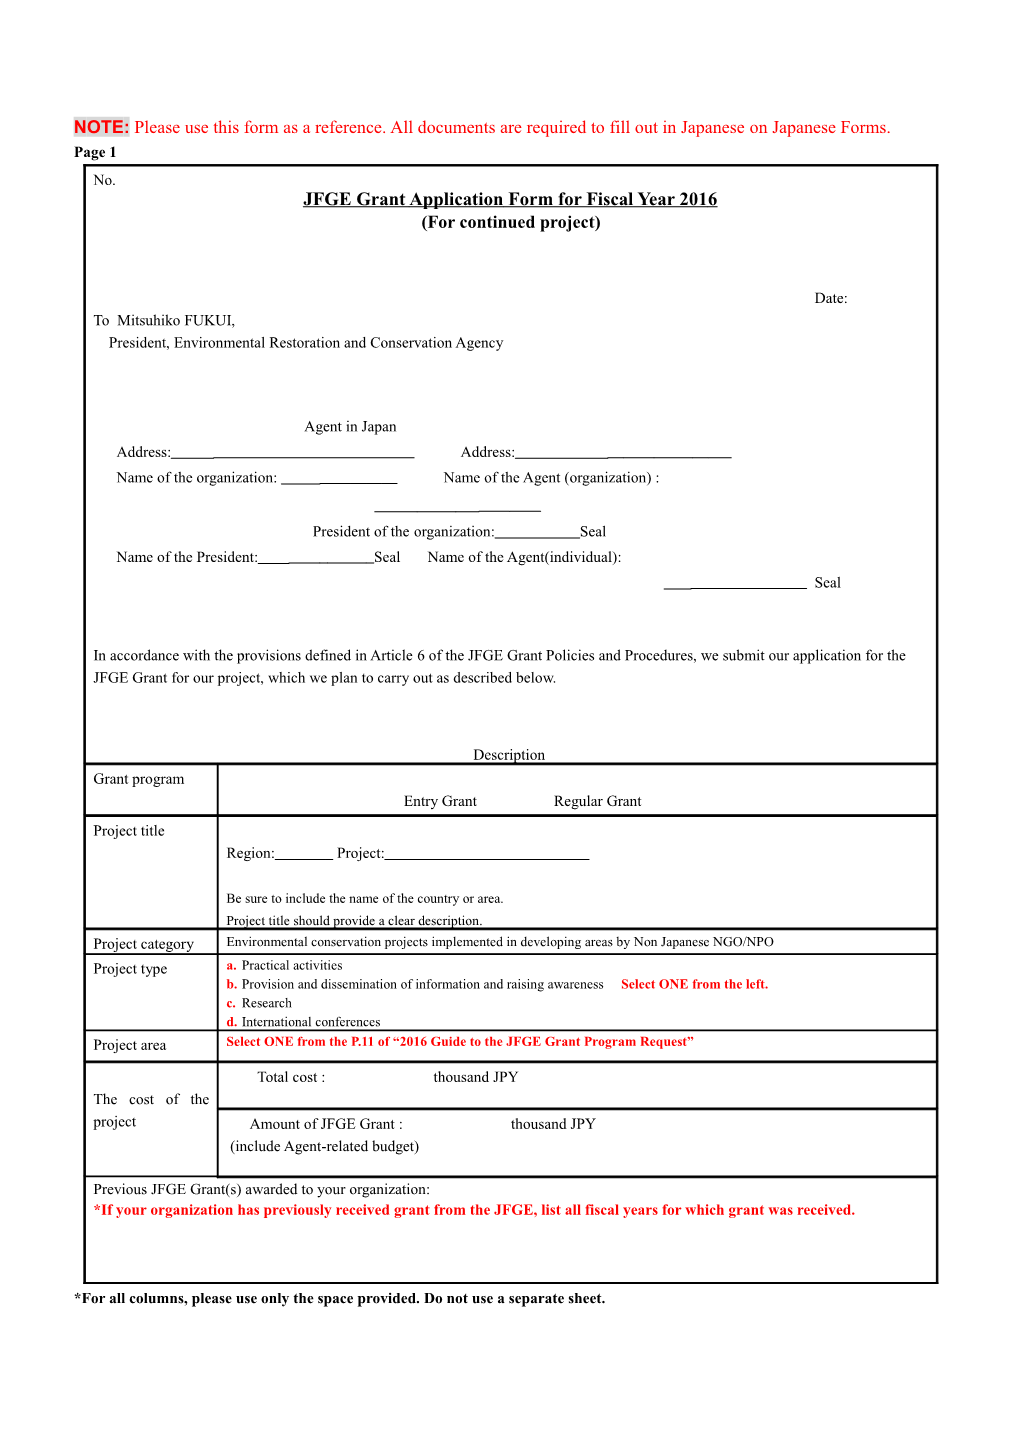 NOTE:Please Use This Form As a Reference. All Documents Are Required to Fill out in Japanese